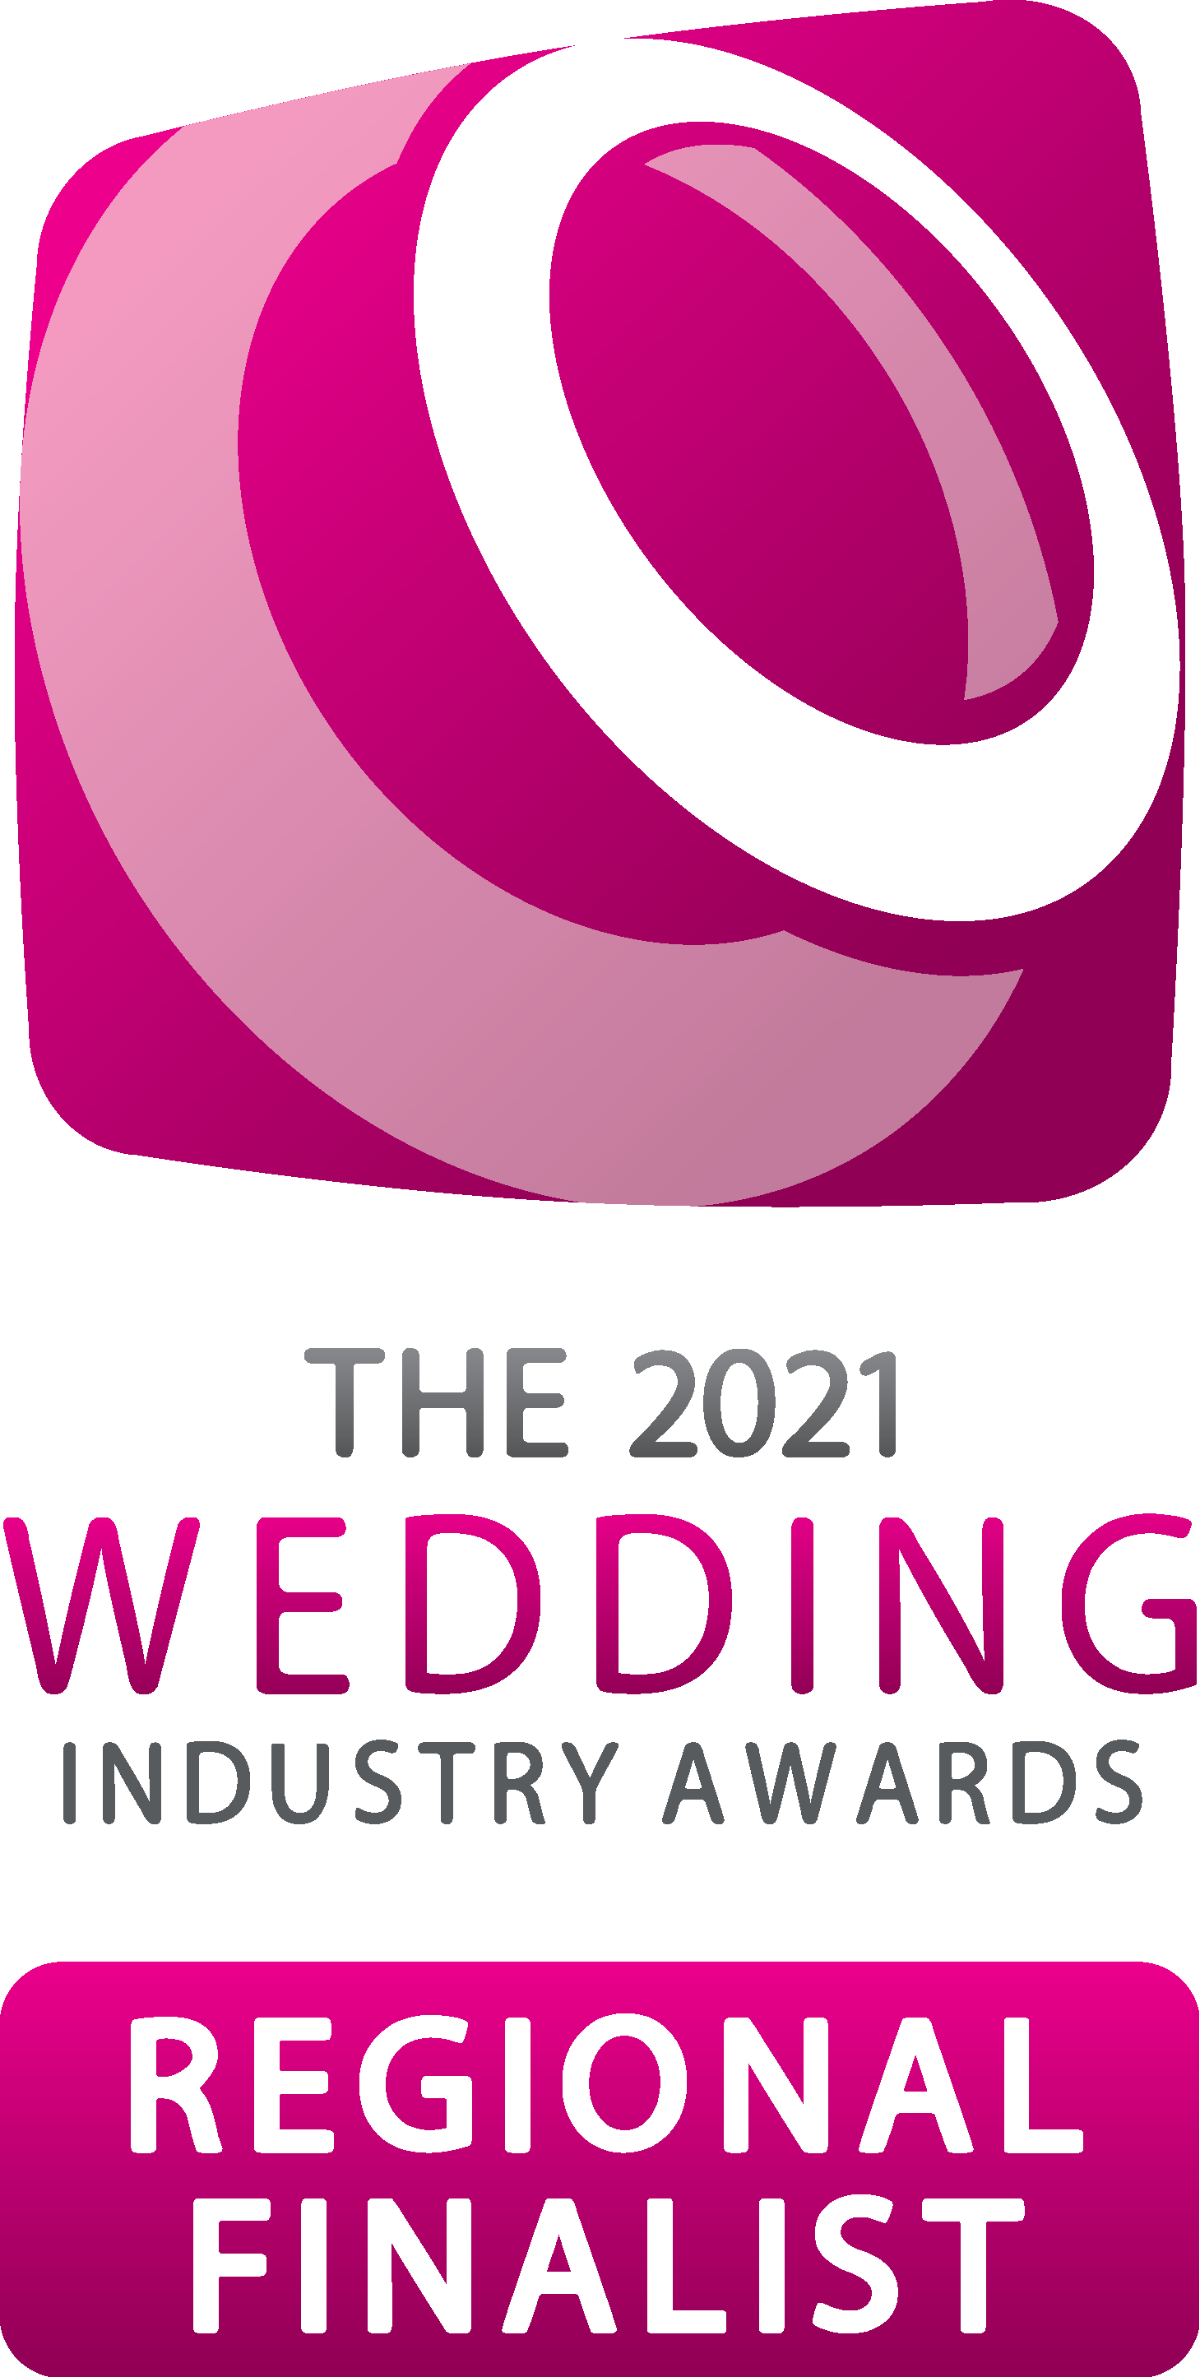 The Wedding Industry Awards 2021 - Regional Finalist in the East of England for Wedding Hairstyling